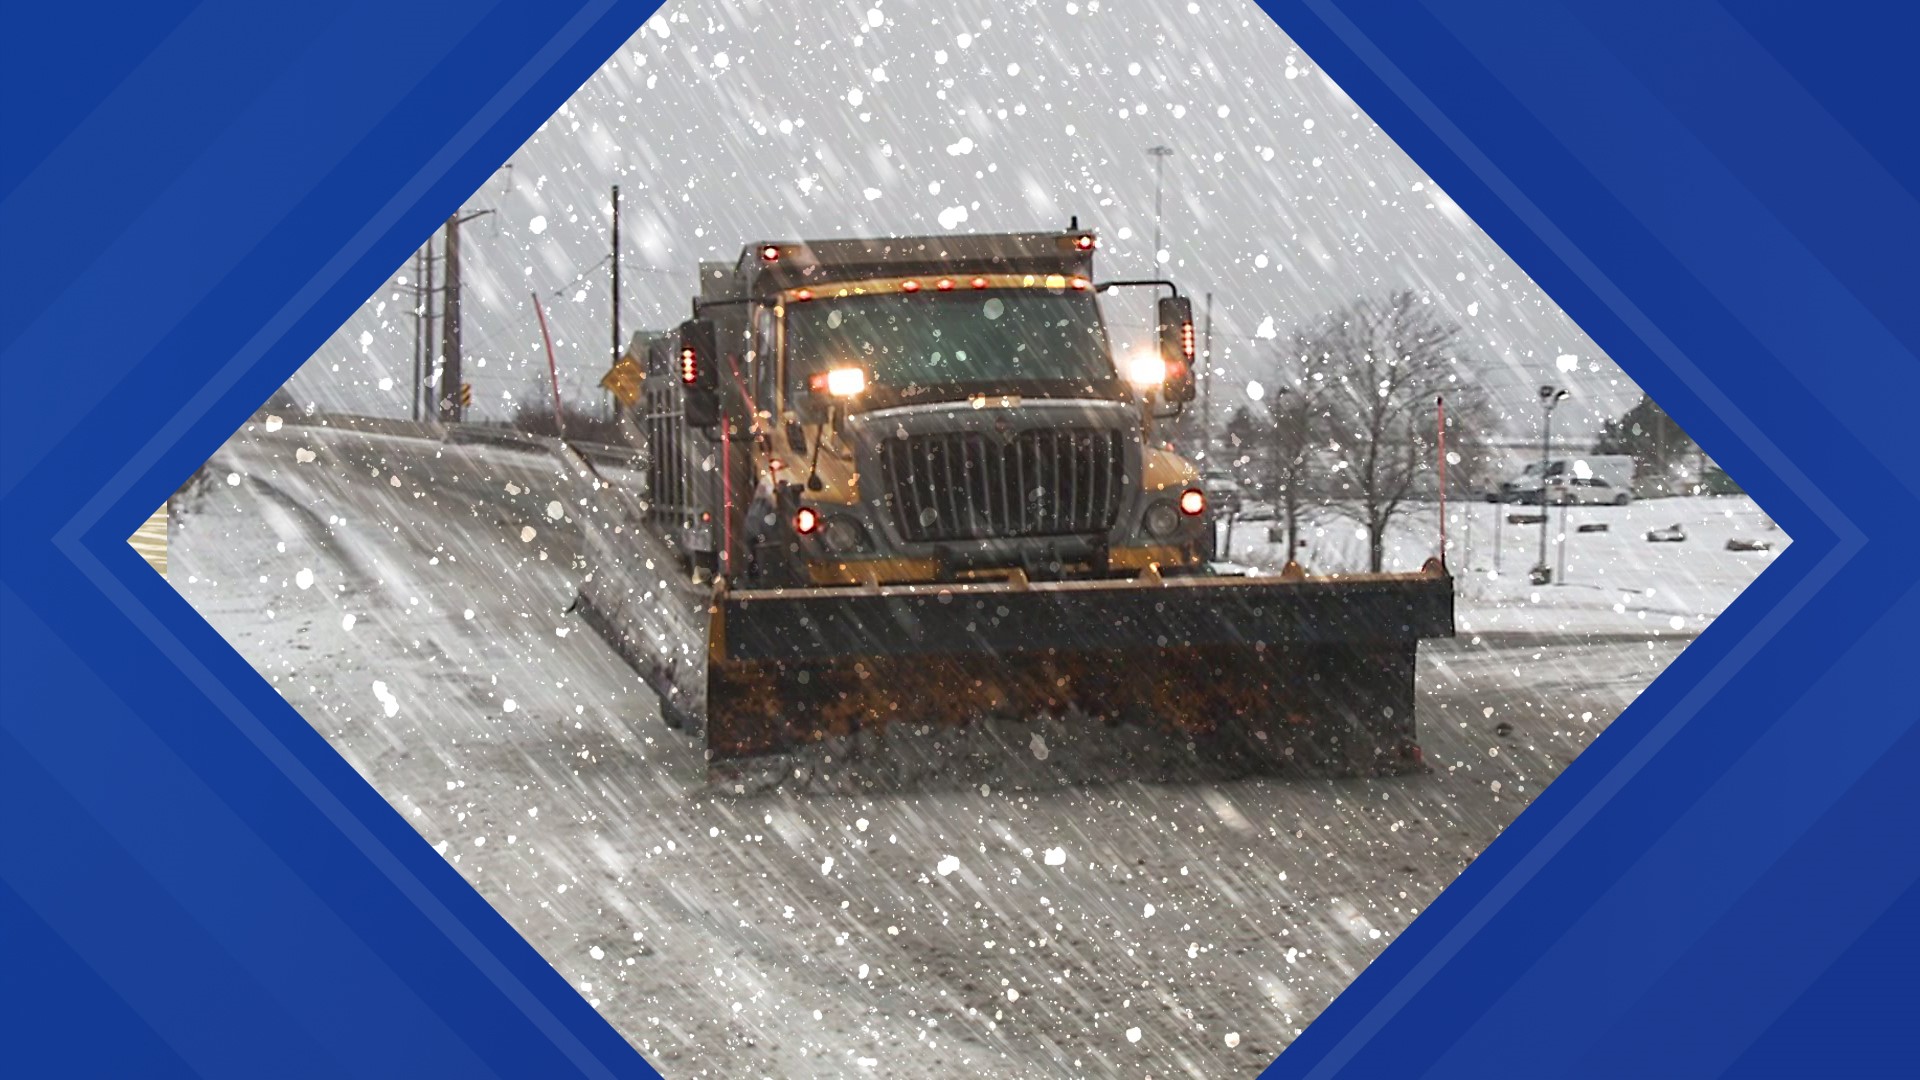 Many of us might not be thinking ahead to winter, but PennDOT sure is. The Poconos is one place that gets hit pretty hard during the cold months.